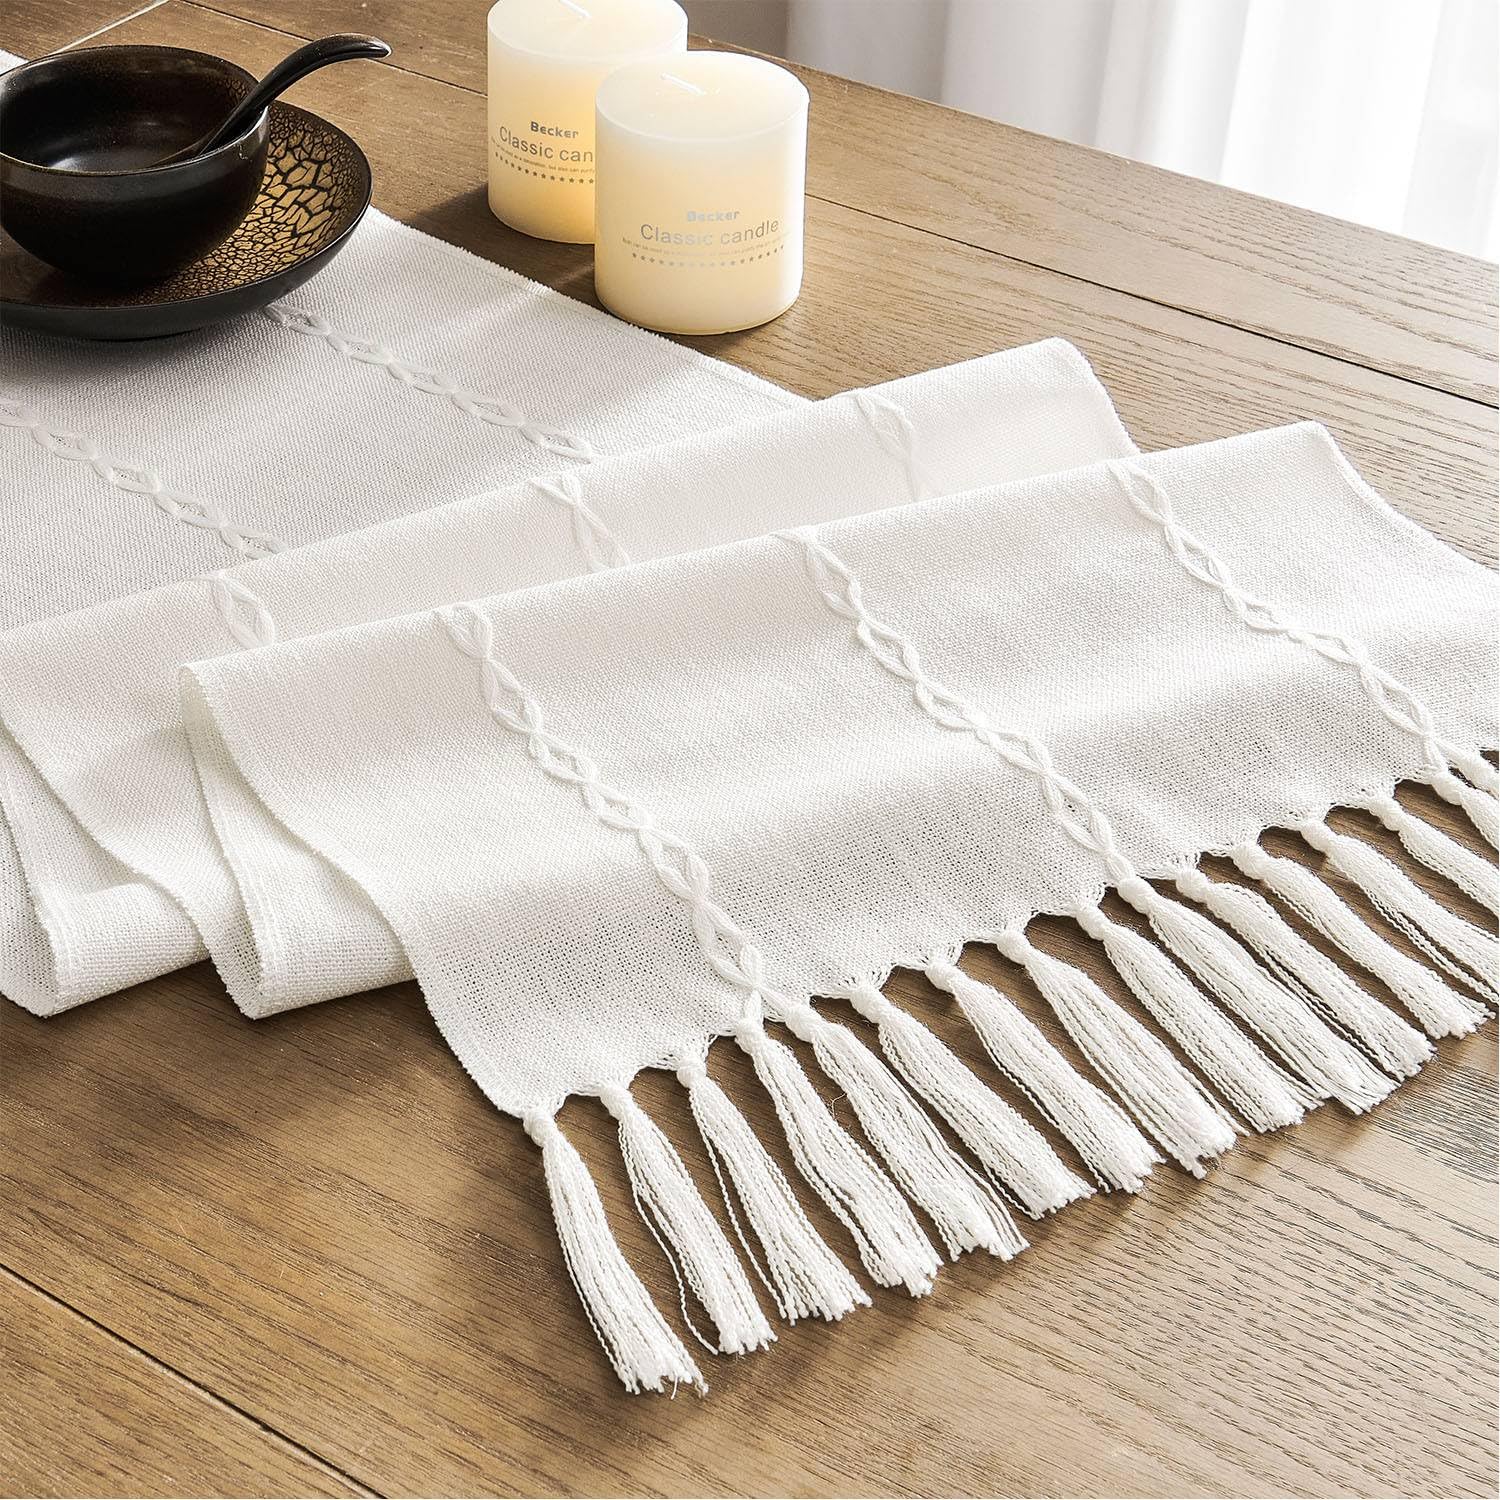 ZeeMart Farmhouse Table Runner, Rustic Table Runners 48 Inches Long, Linen Boho Table Runner, Braided Striped White Table Runner for Dining Party Holiday, 15x48 Inches, Braided Off White